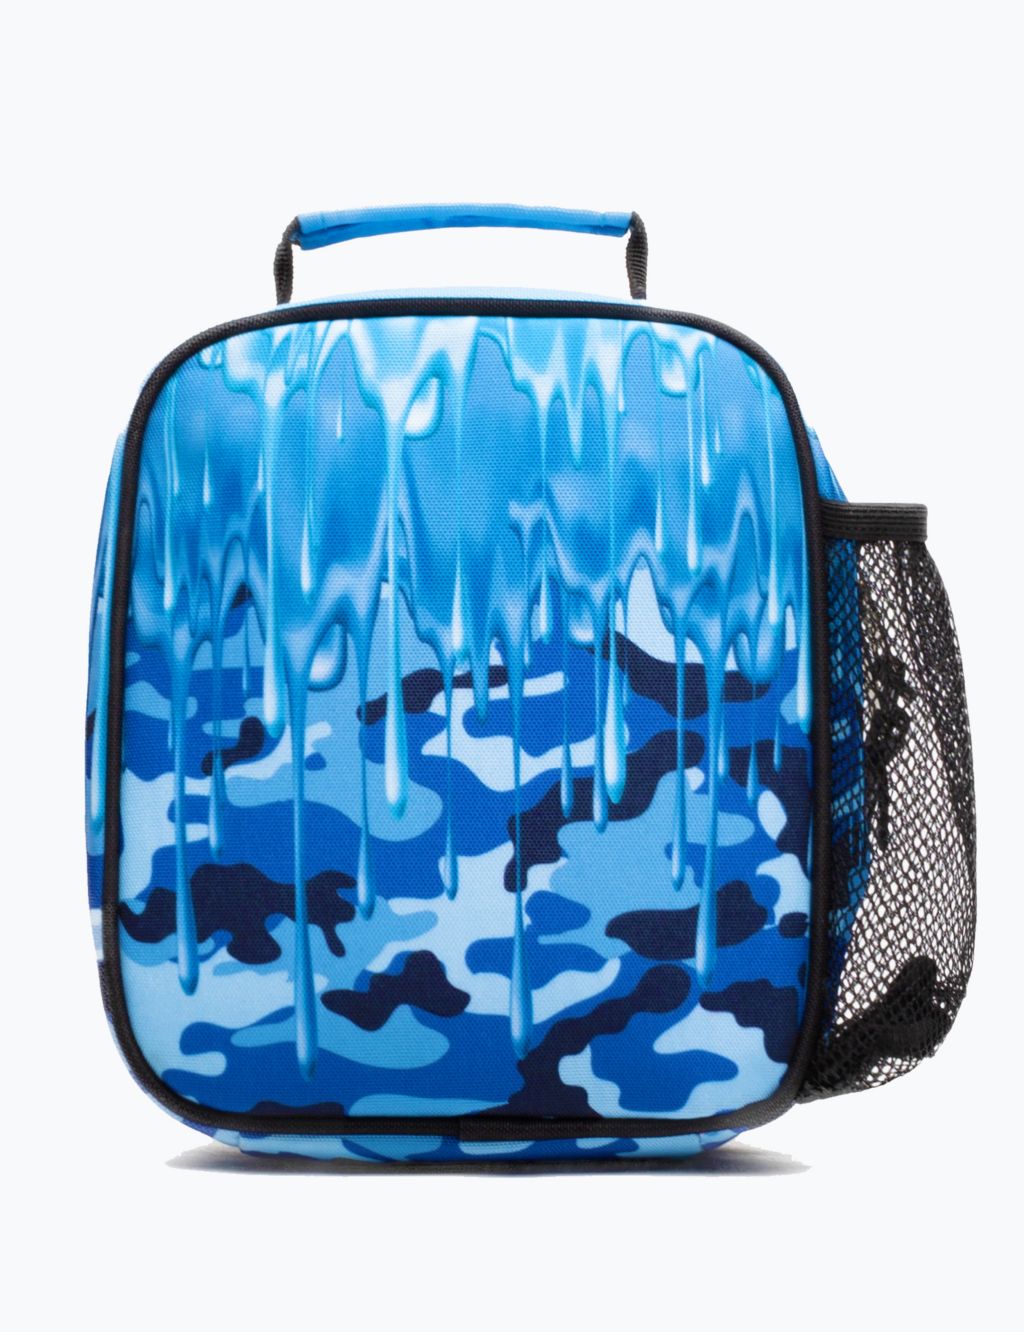 Kids' Camouflage Lunch Box image 6